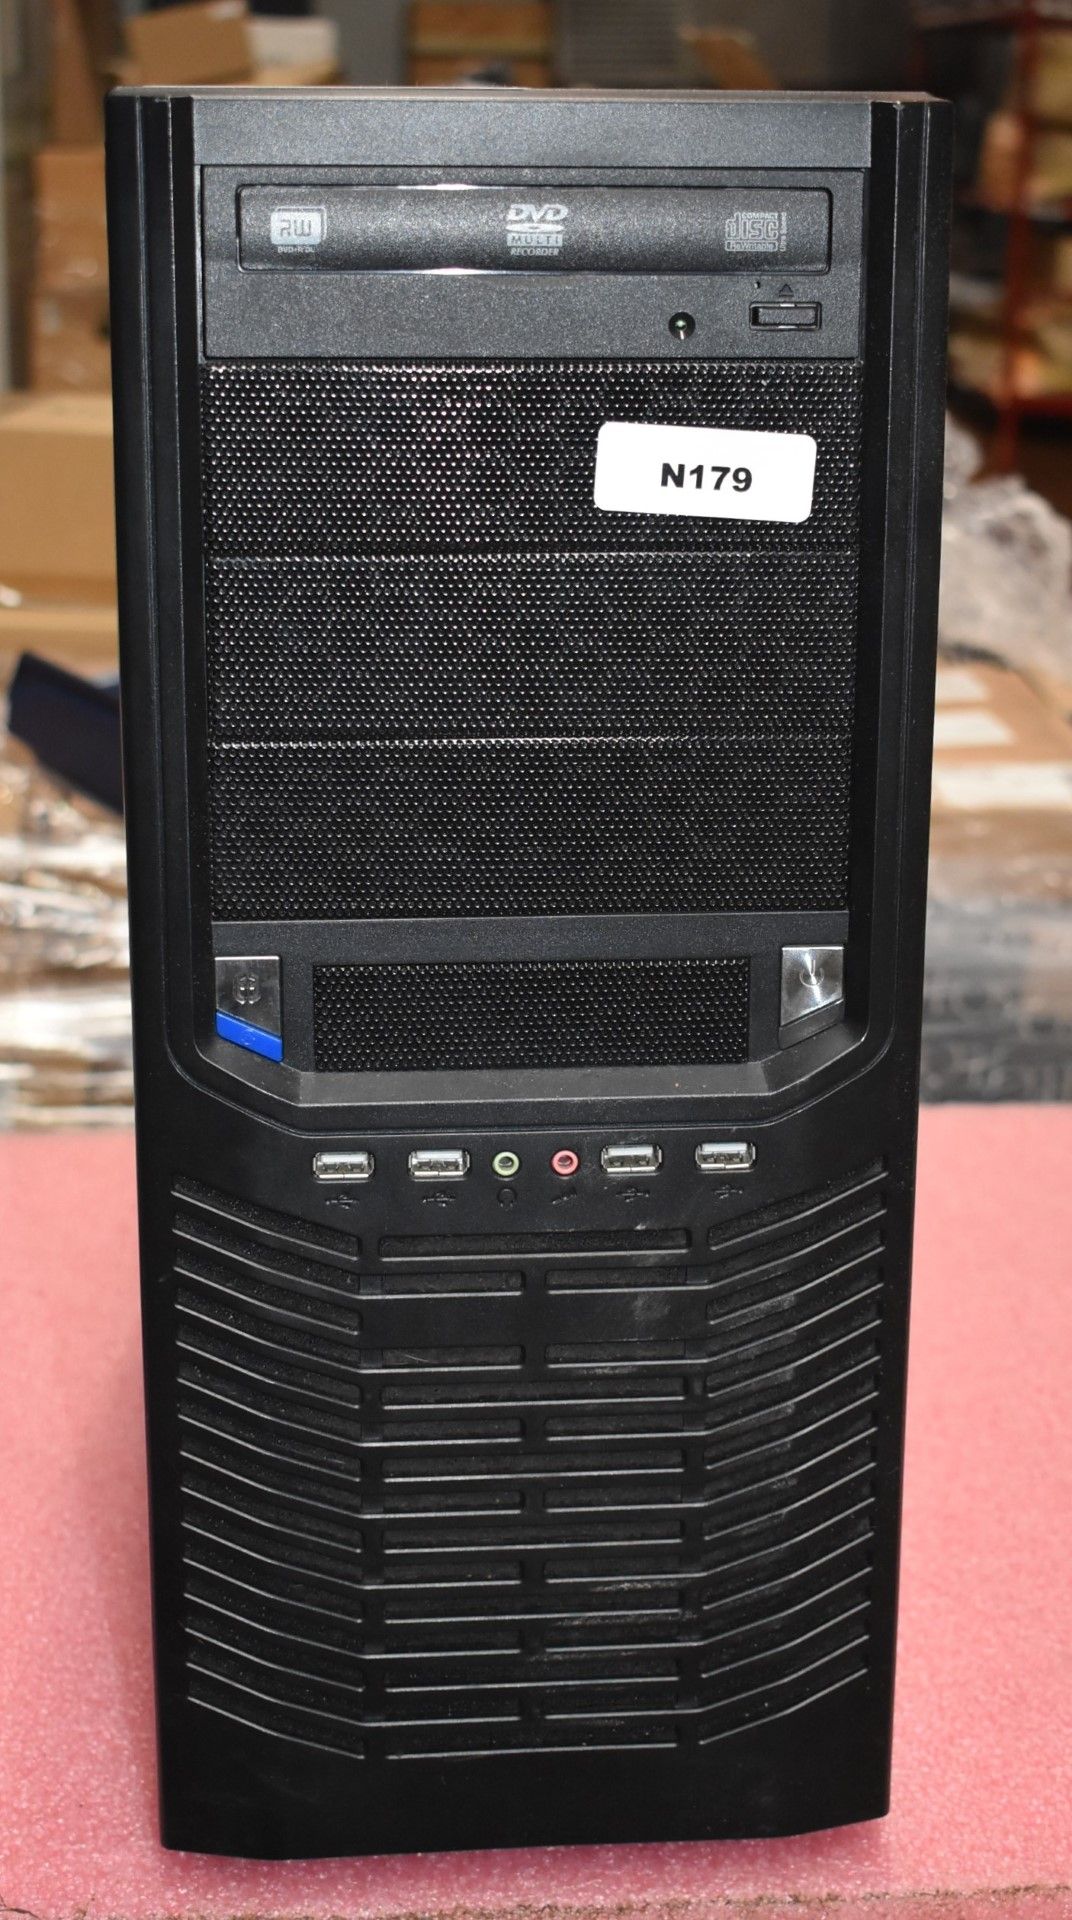 1 x Desktop Gaming PC Featuring an AMD FX6300 Processor, 12GB Ram and an XFX Radeon 7890 Graphics - Image 2 of 10